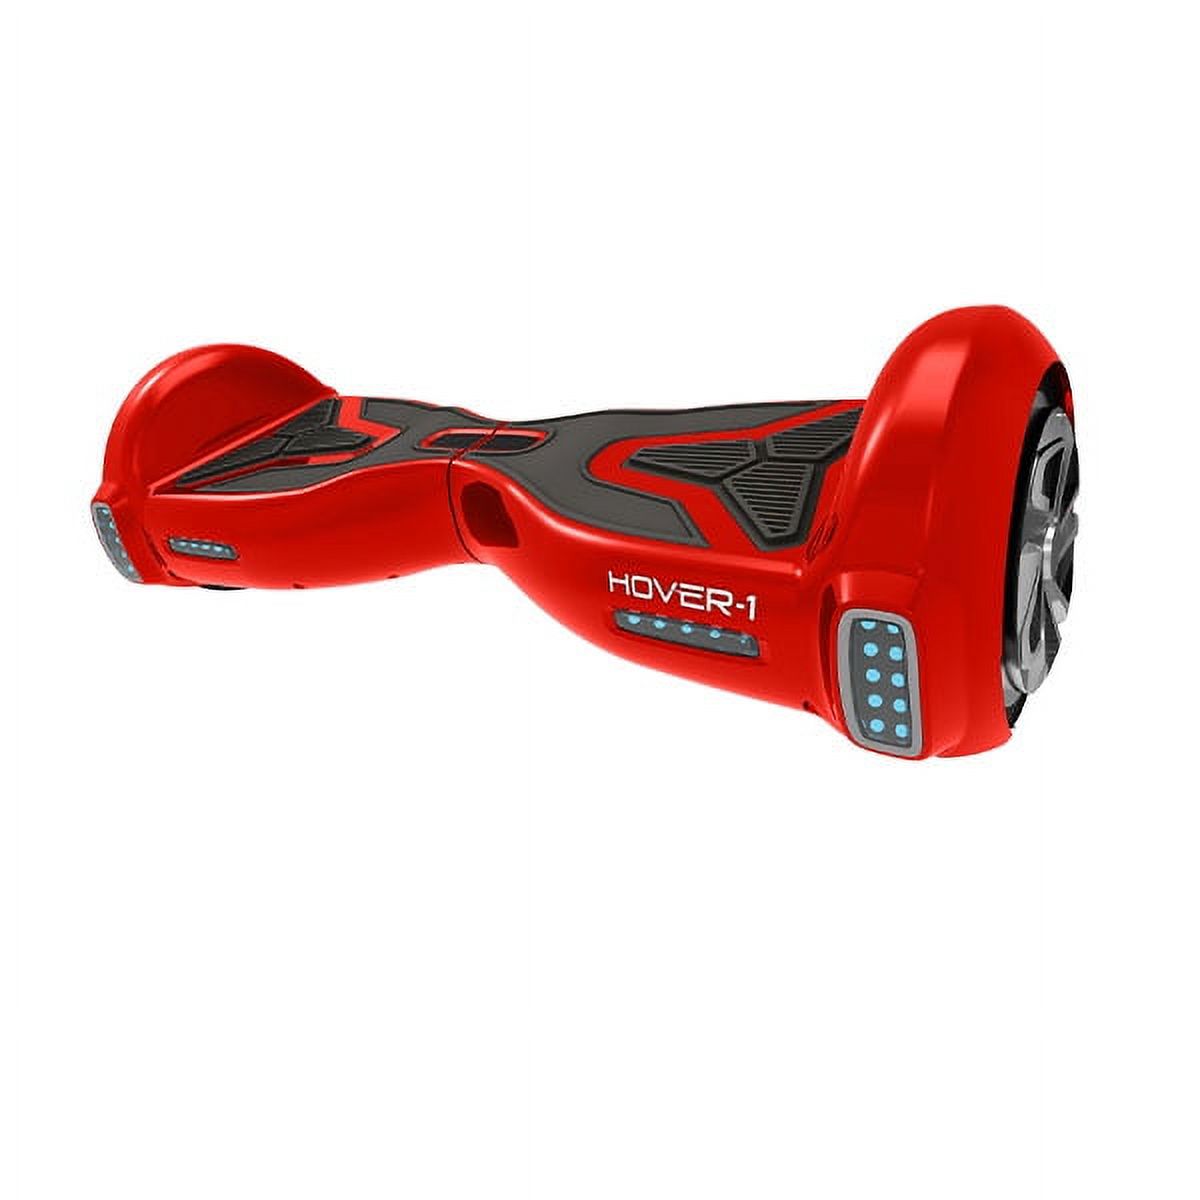 Hover-1 H1 Hoverboard, Red, 264 Lbs. Max Weight with LED Lights - image 1 of 8